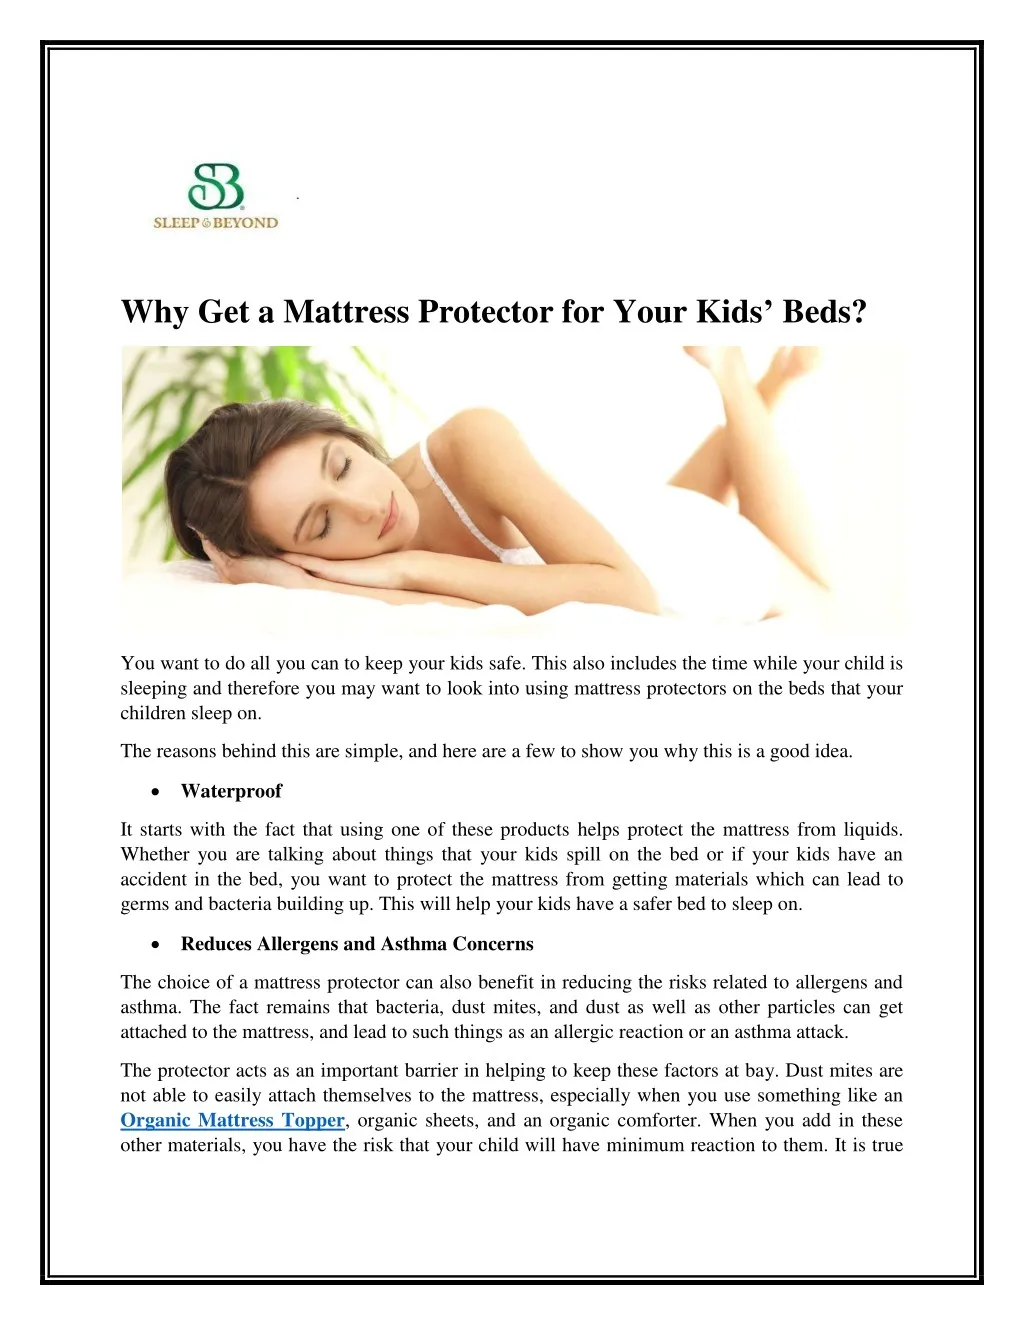 why get a mattress protector for your kids beds